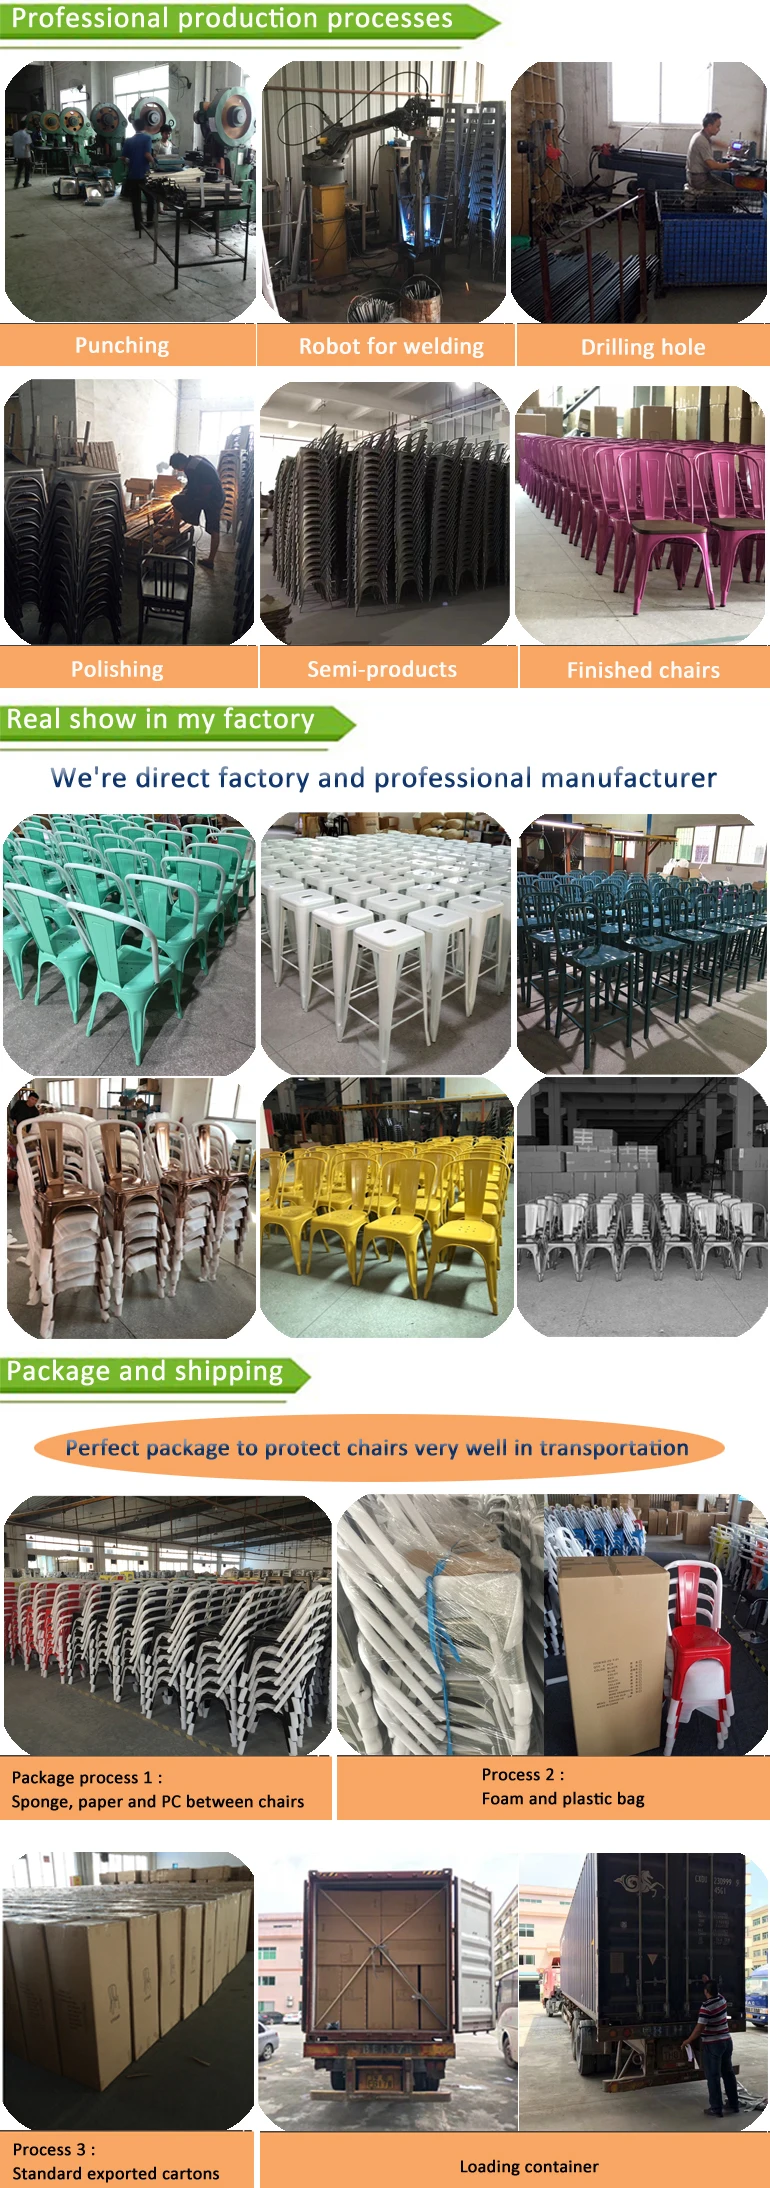 Wholesale cheap French restaurant used dining room furniture industrial vintage dining table with attached chair